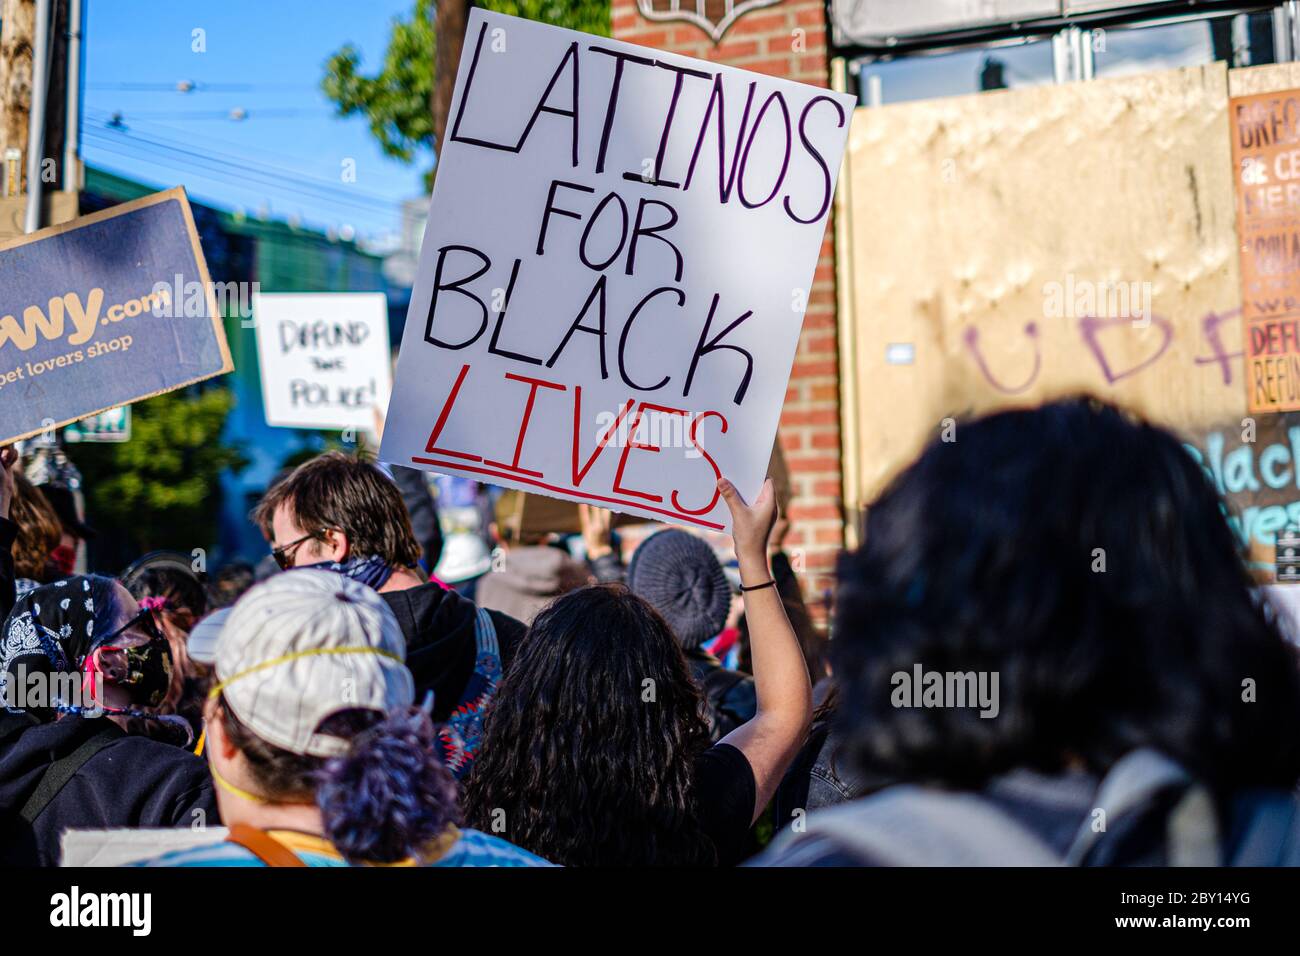 SEATTLE, USA - JUNE 6, 2020: A latin woman holds a sign in a demonstration against racism near a Seattle Police precinct Stock Photo